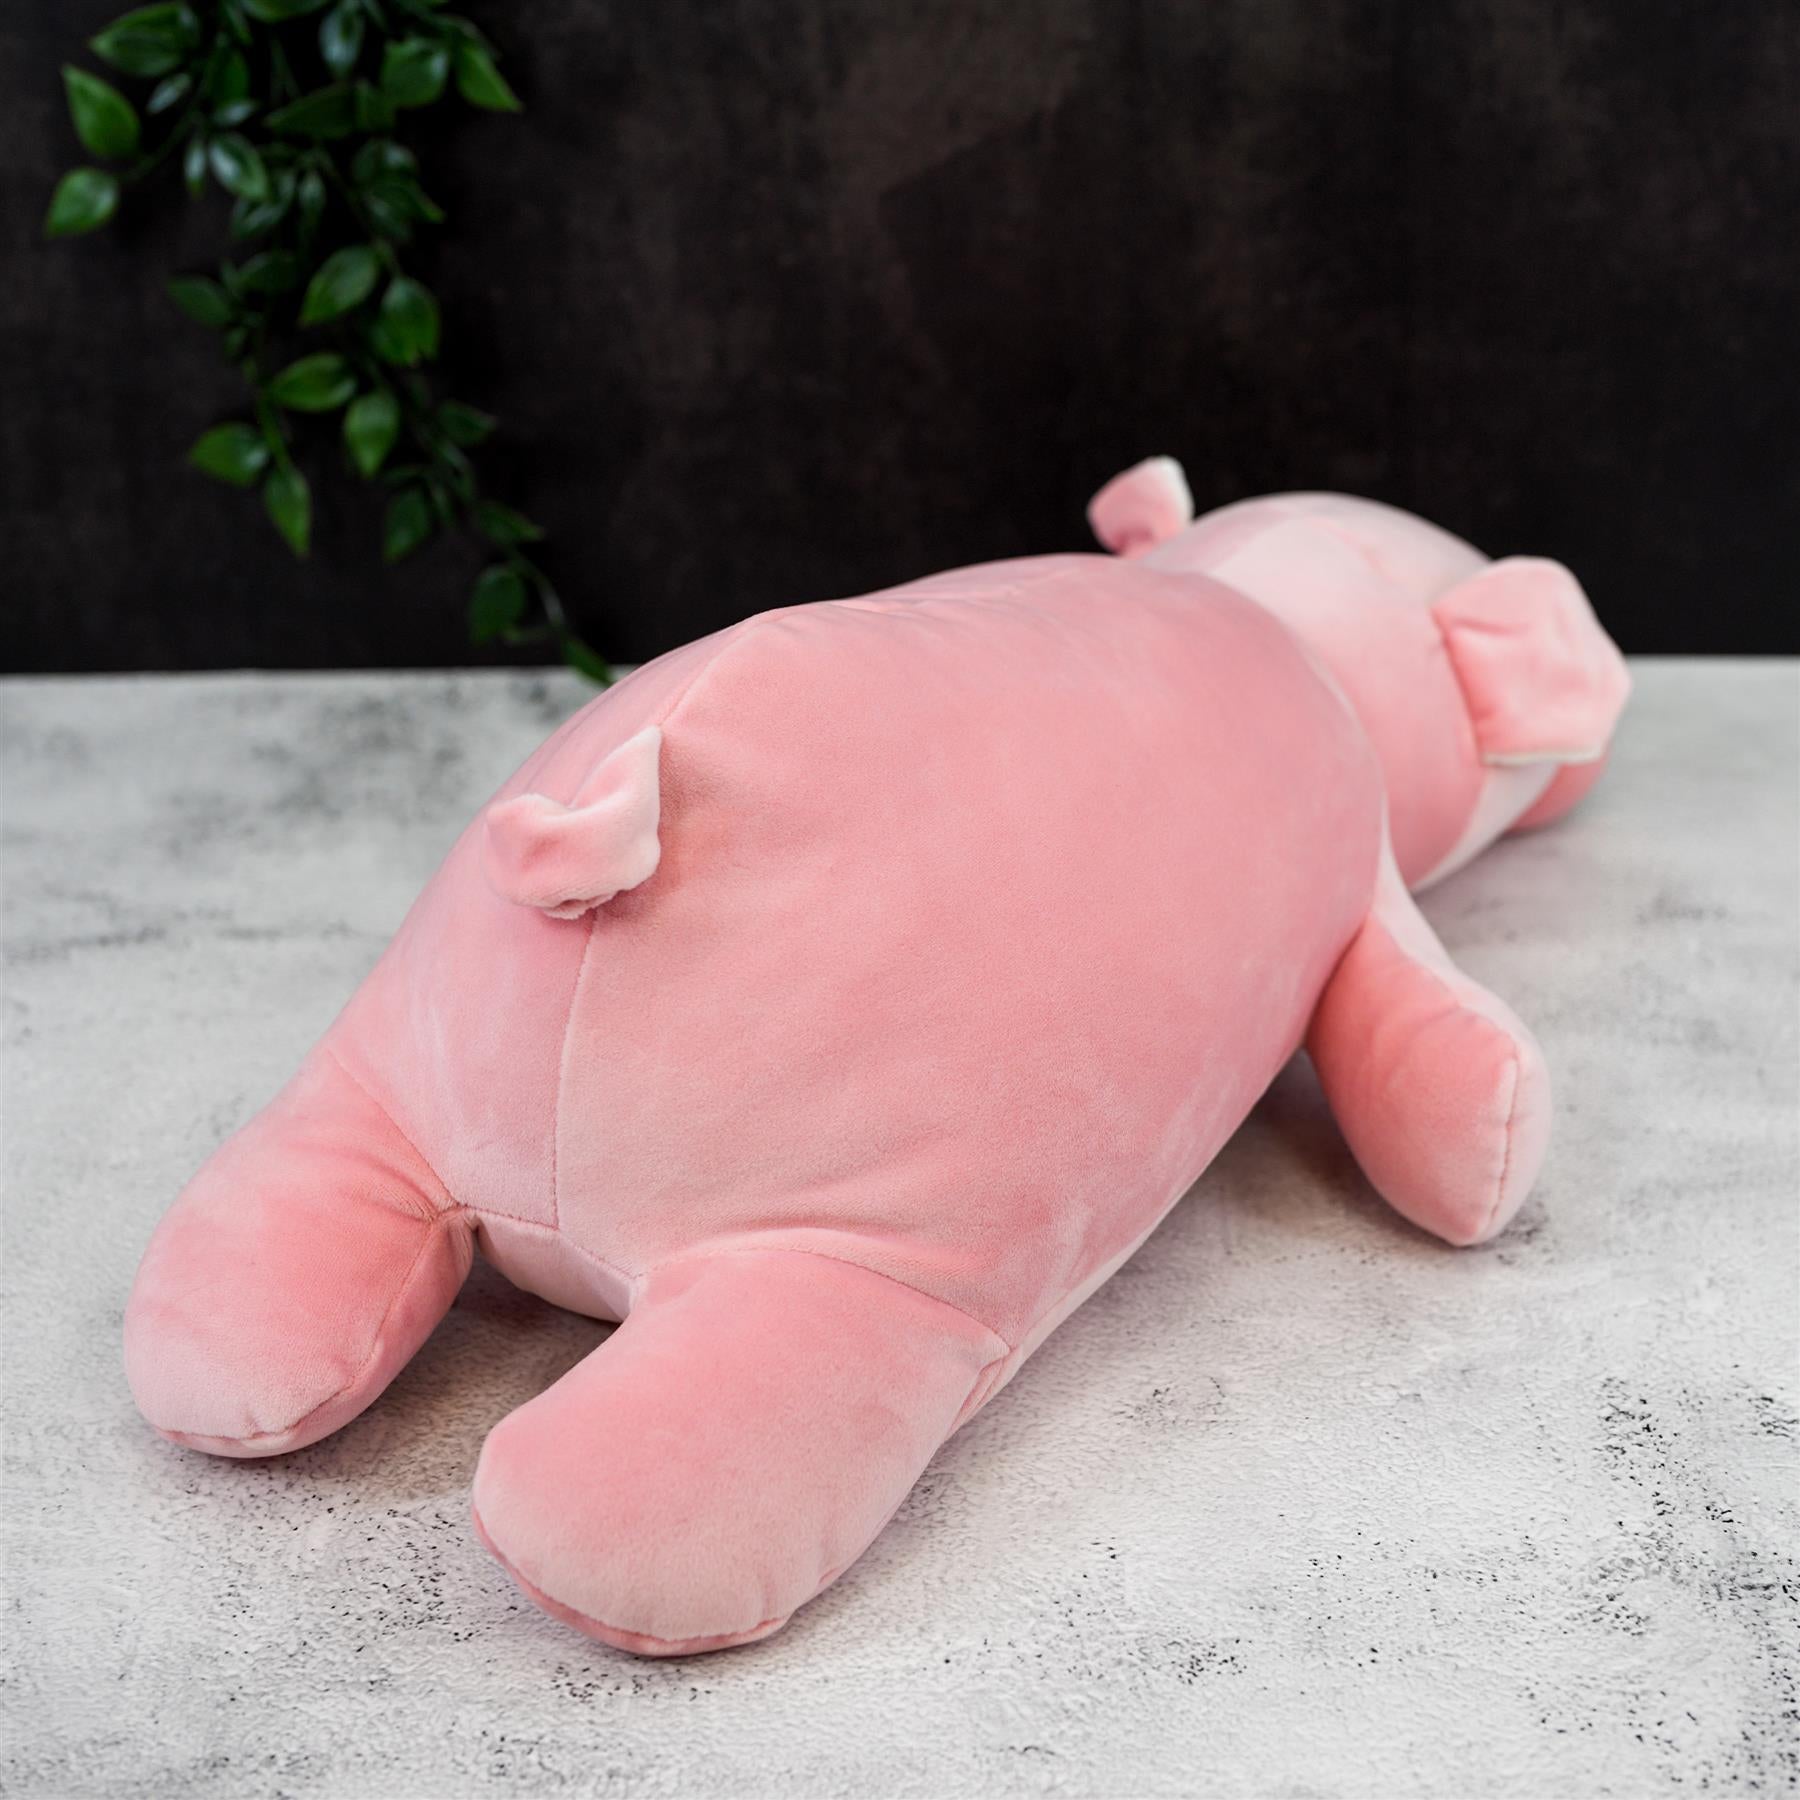 20” Super-Soft Pig Plush Pillow Toy by The Magic Toy Shop - UKBuyZone